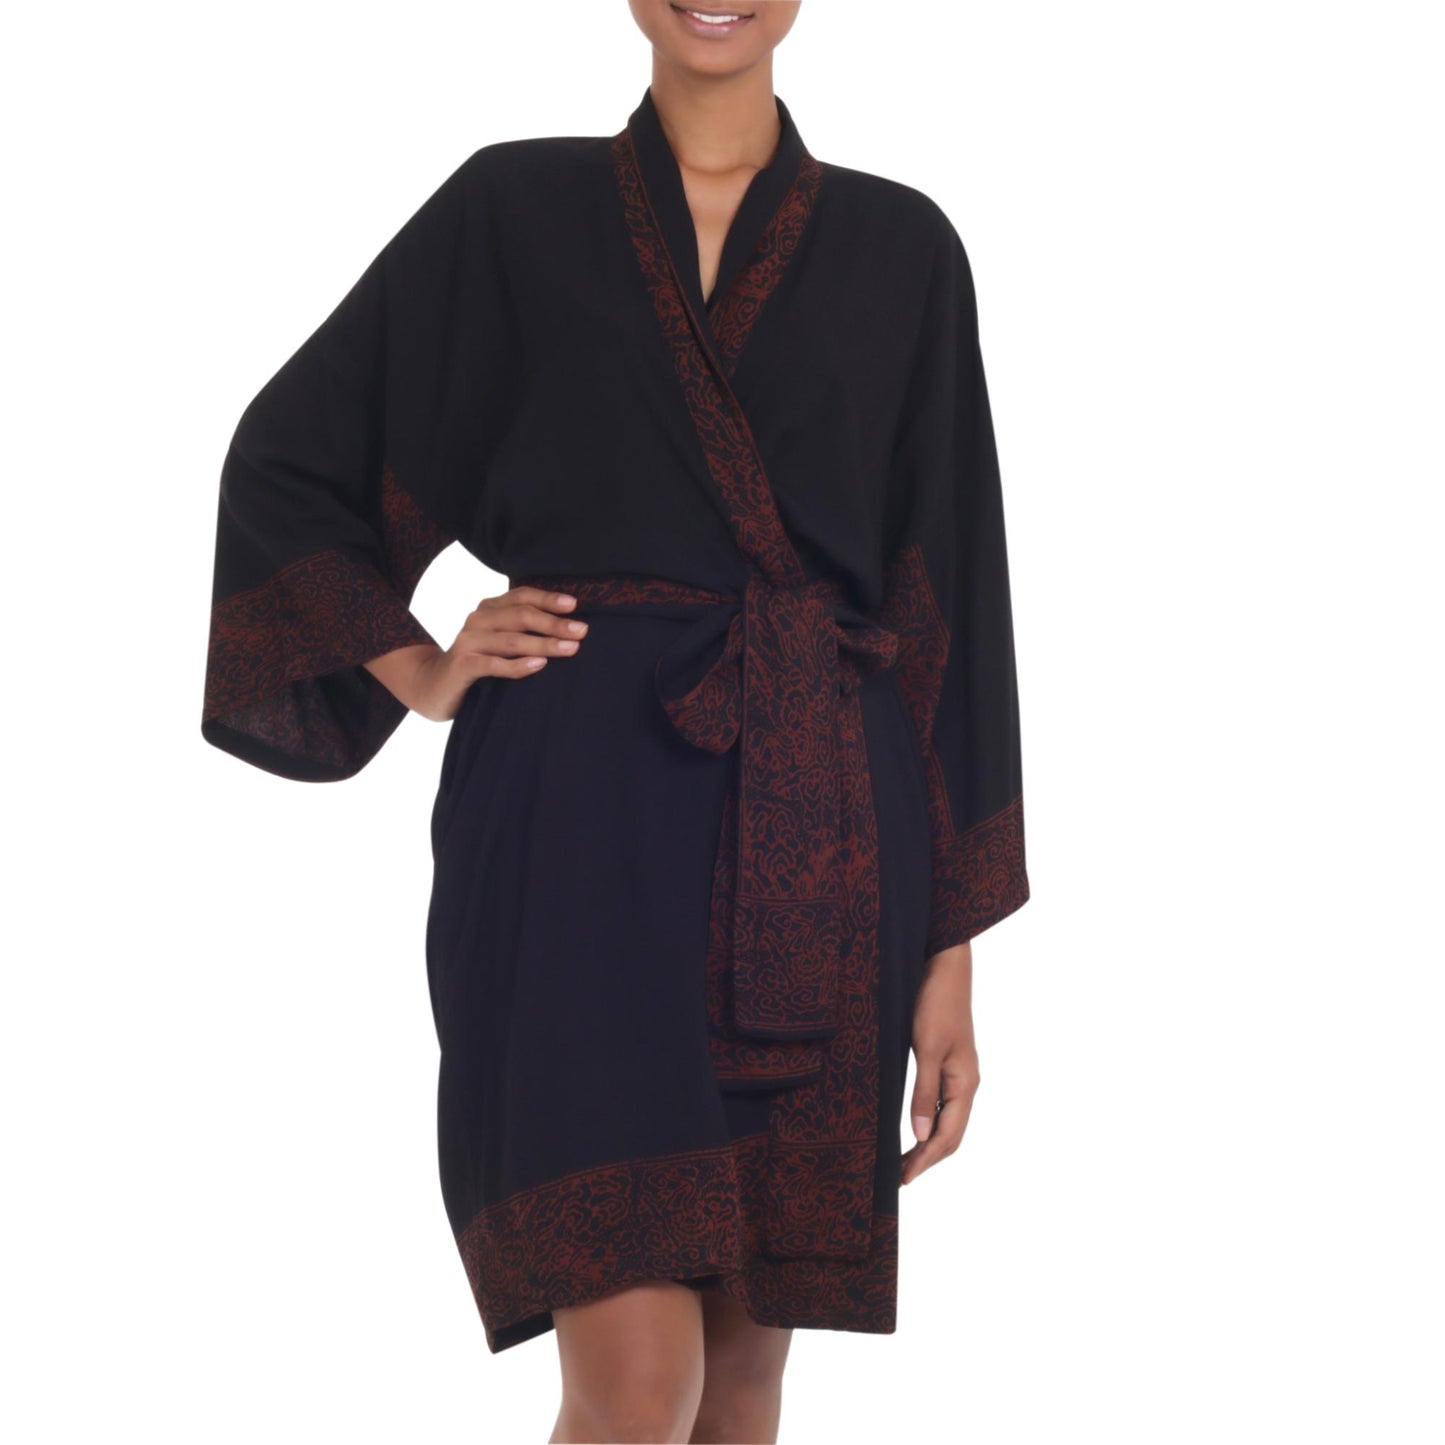 Bewitching Blossom Short Rayon Robe